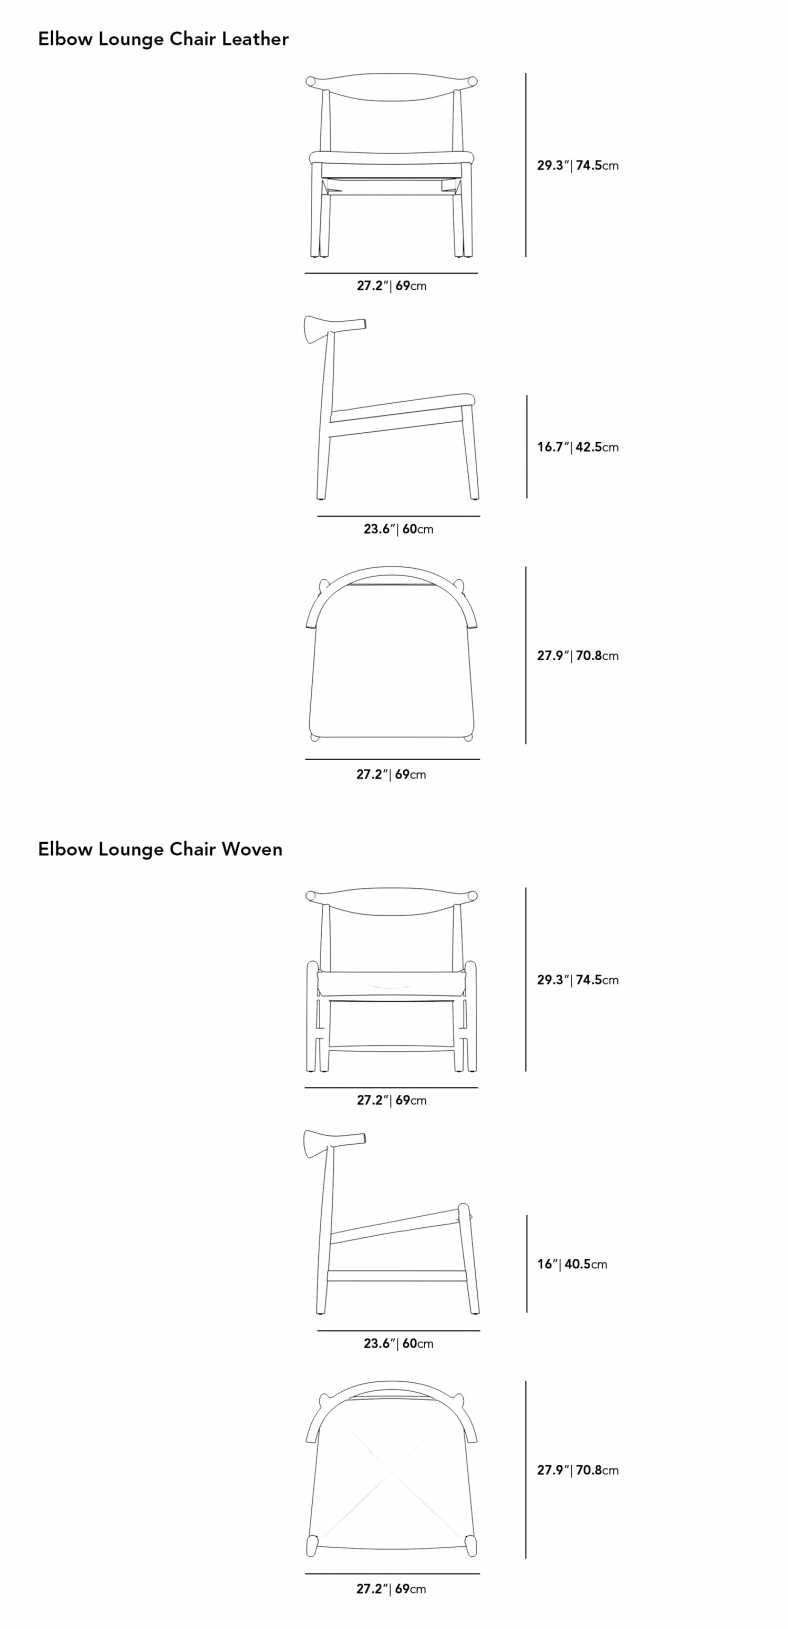 Dimensions for Elbow Lounge Chair - Woven